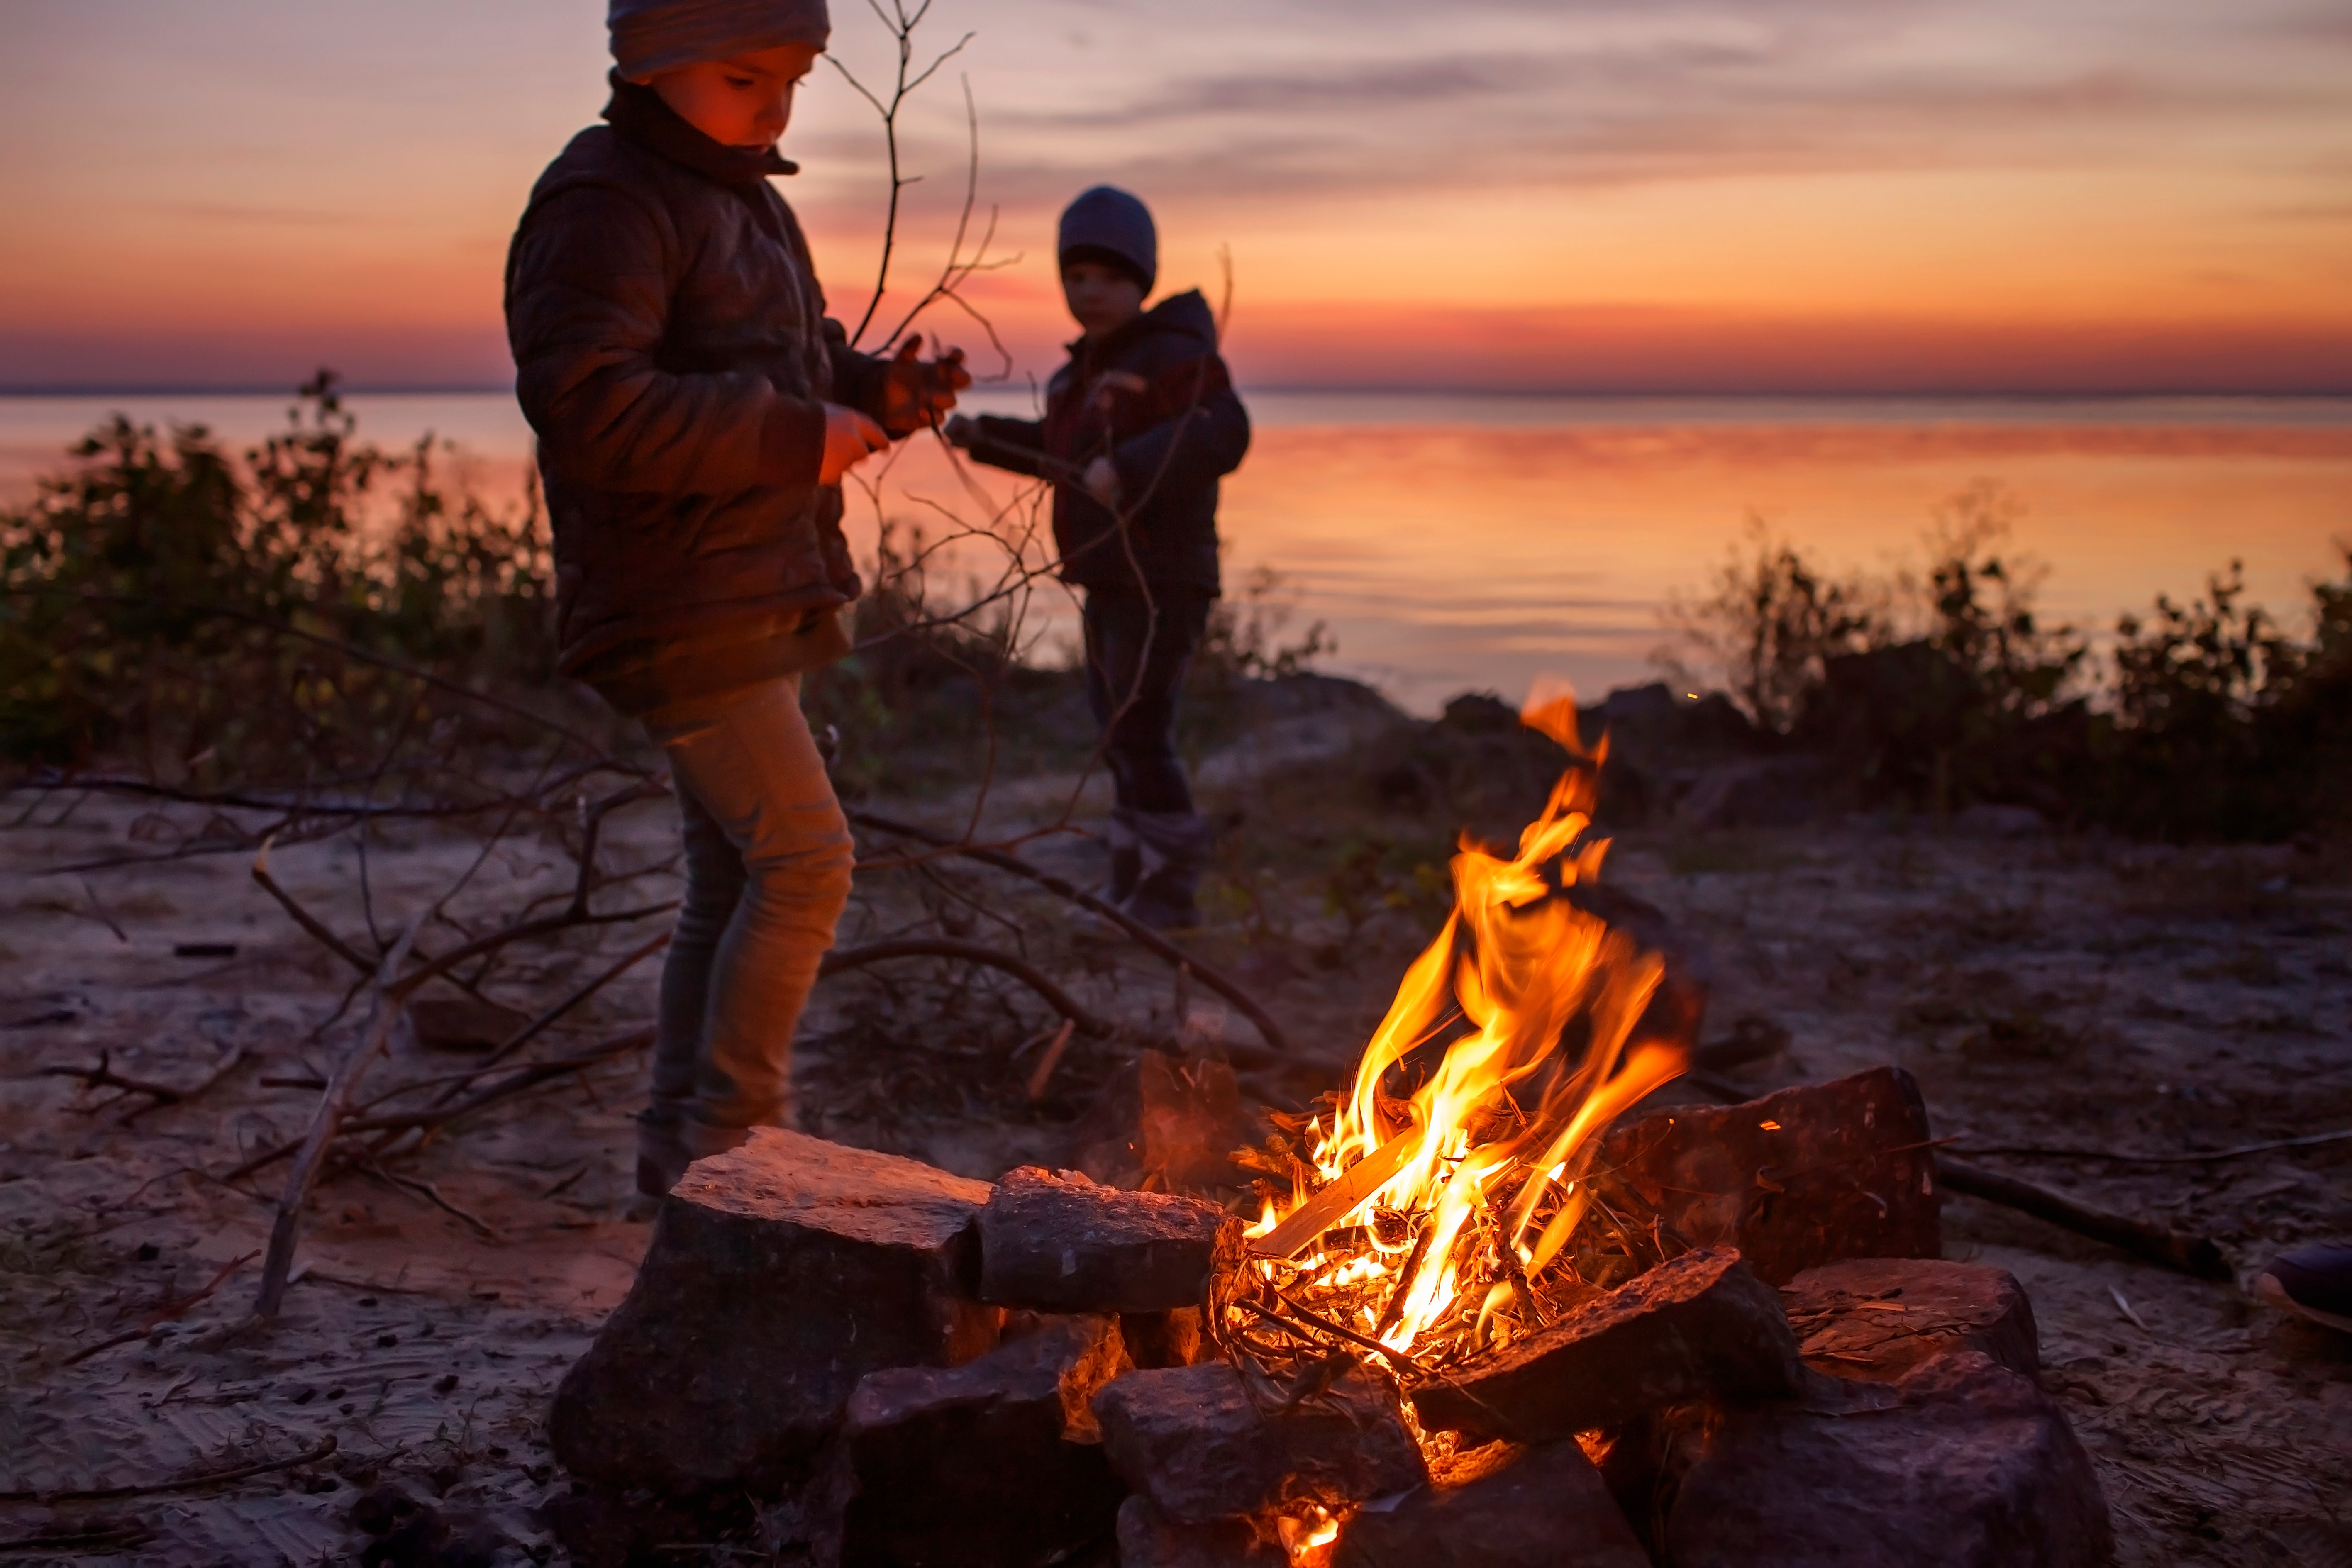 Kids of different ages sit near fire | Source: Shutterstock.com